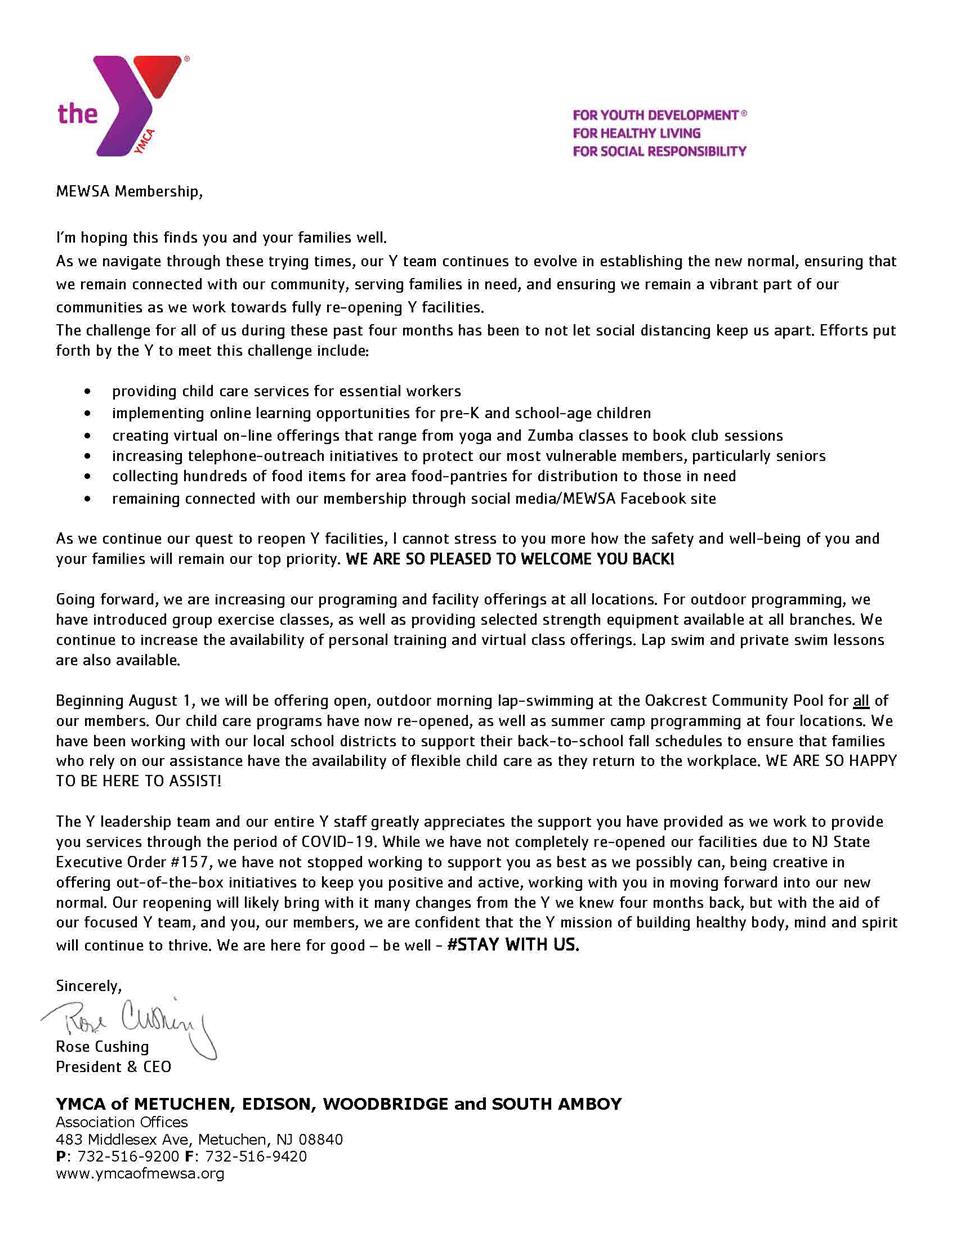 Letter to Members August 2020